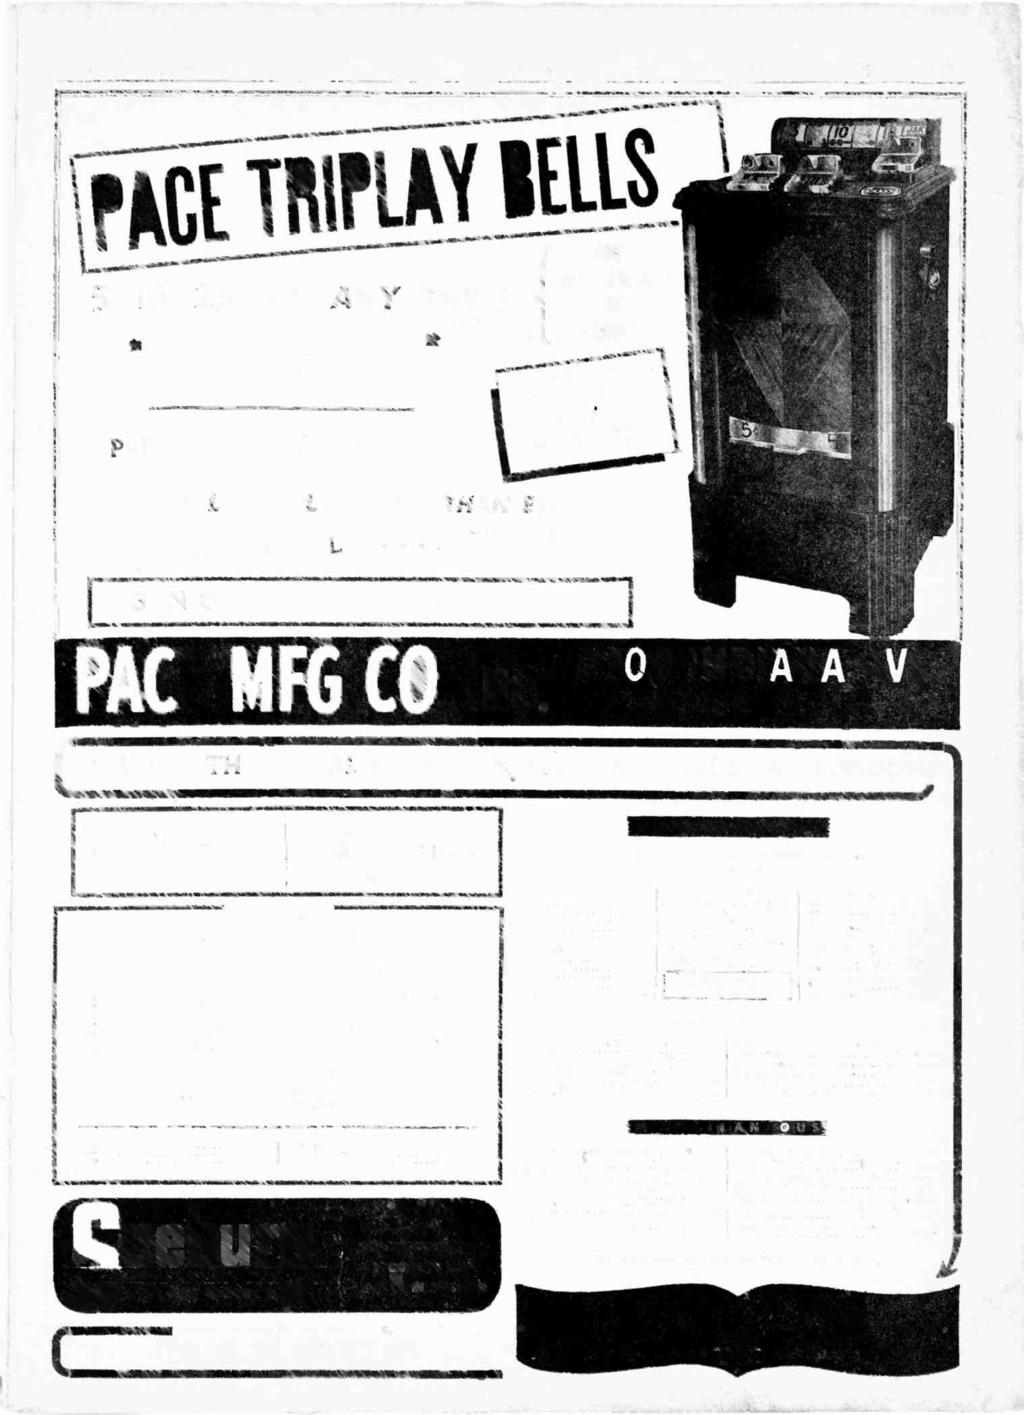 November 15, 1947 The Billboard COIN MACHINES 123 PACE TRIPIBAY BUIS ONE -1.